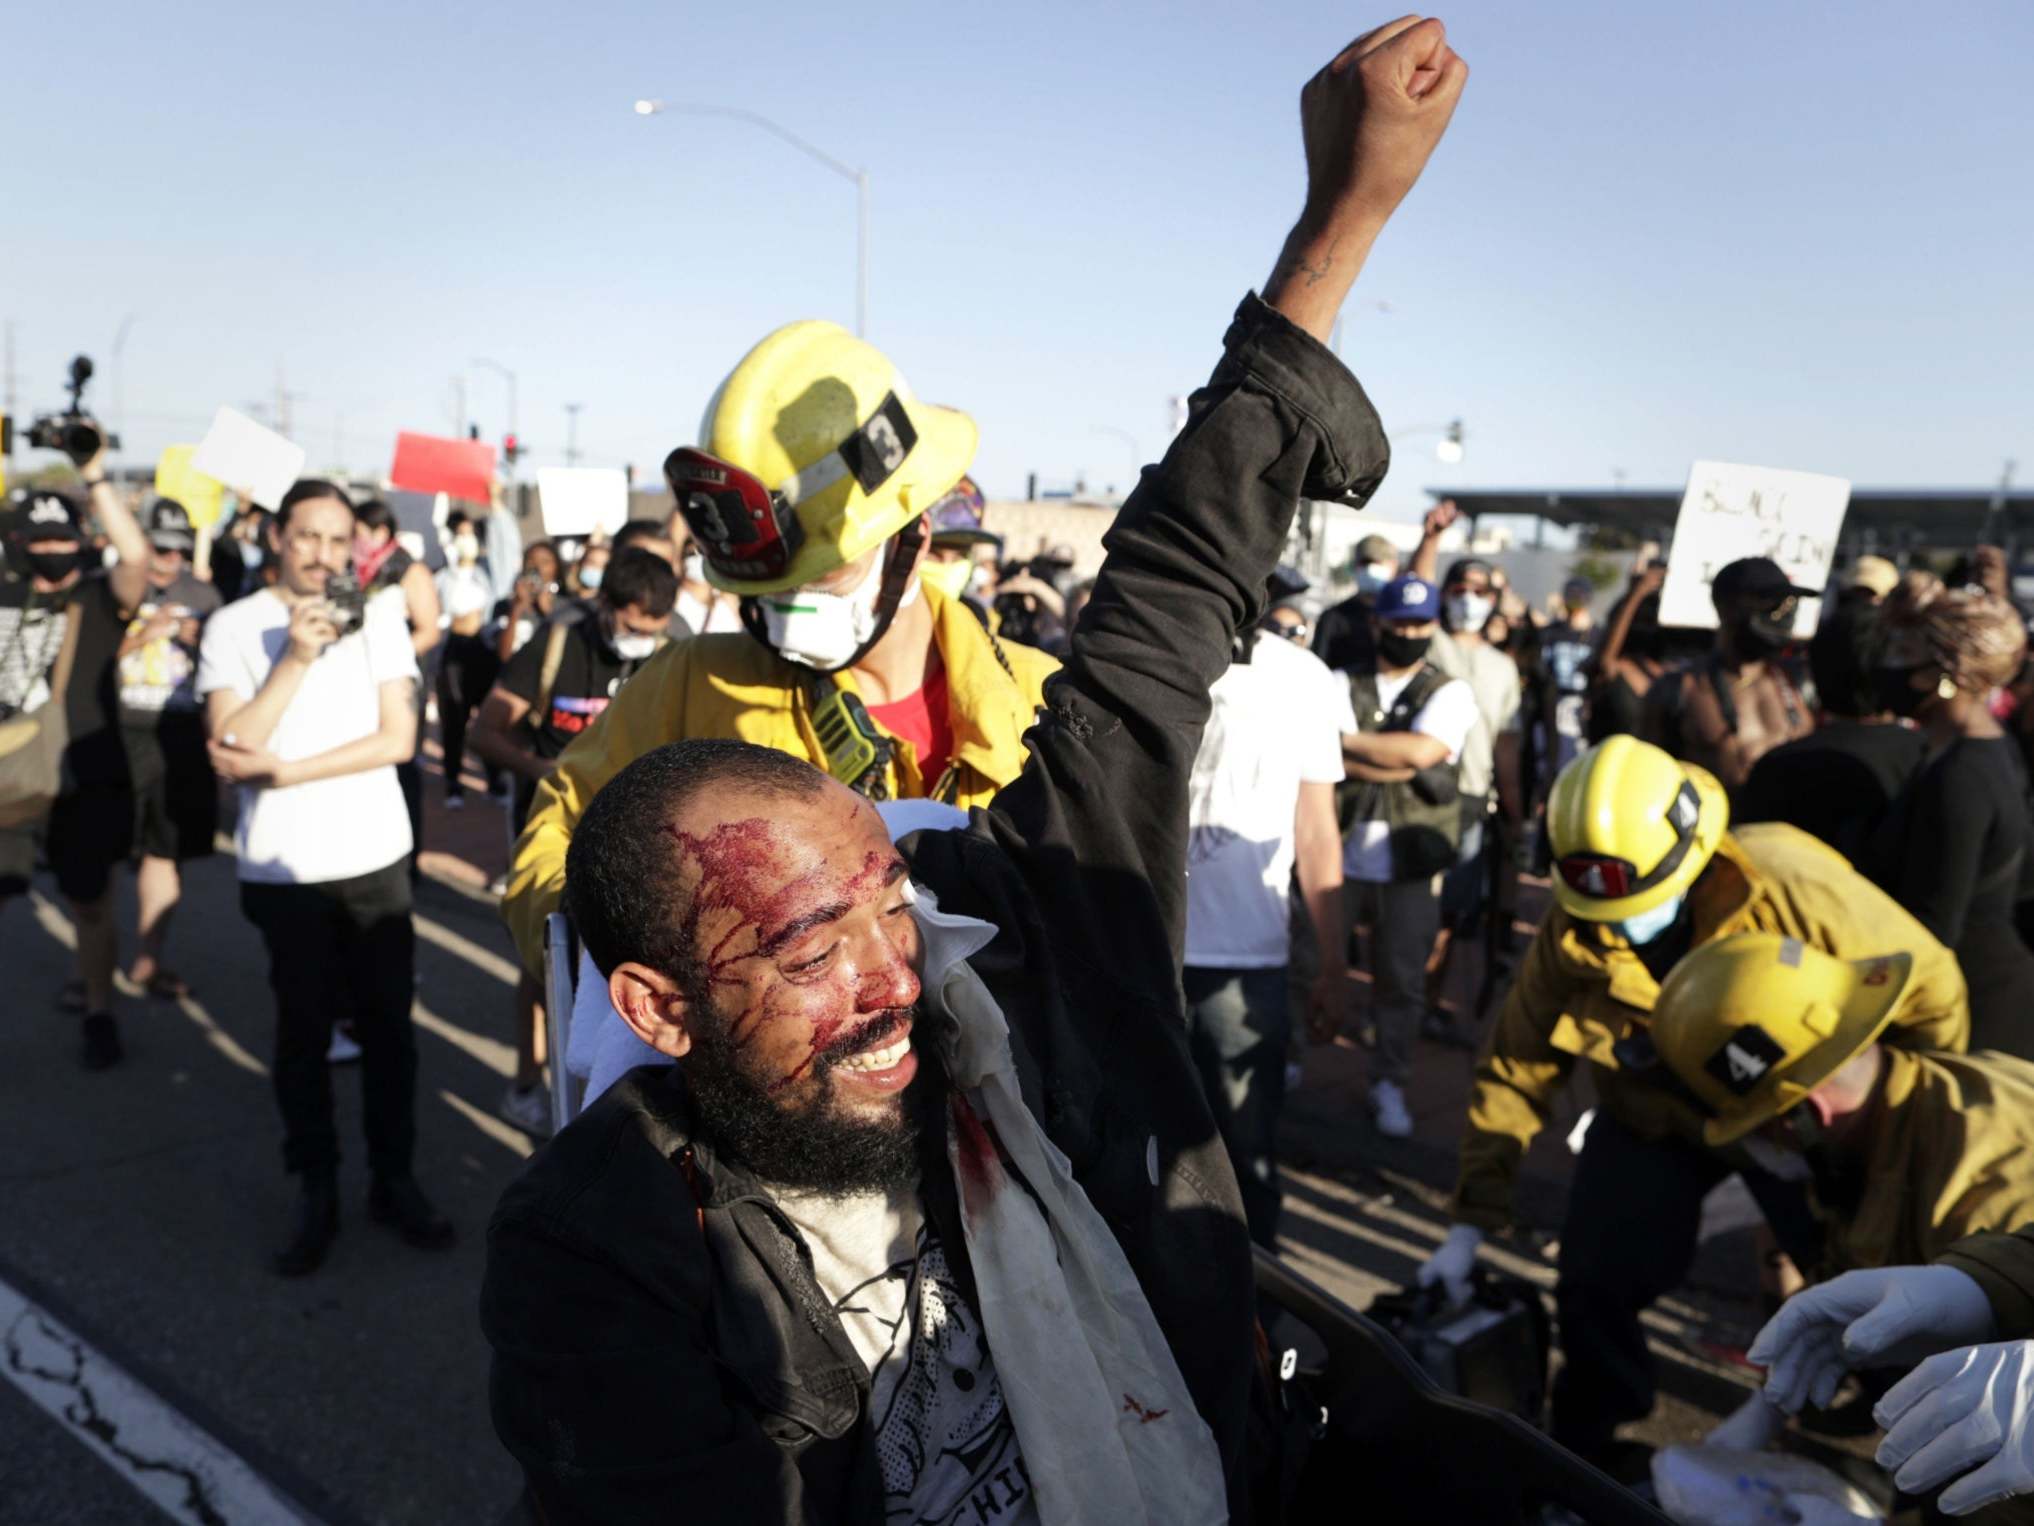 Man helped by fire department following protest in Los Angeles